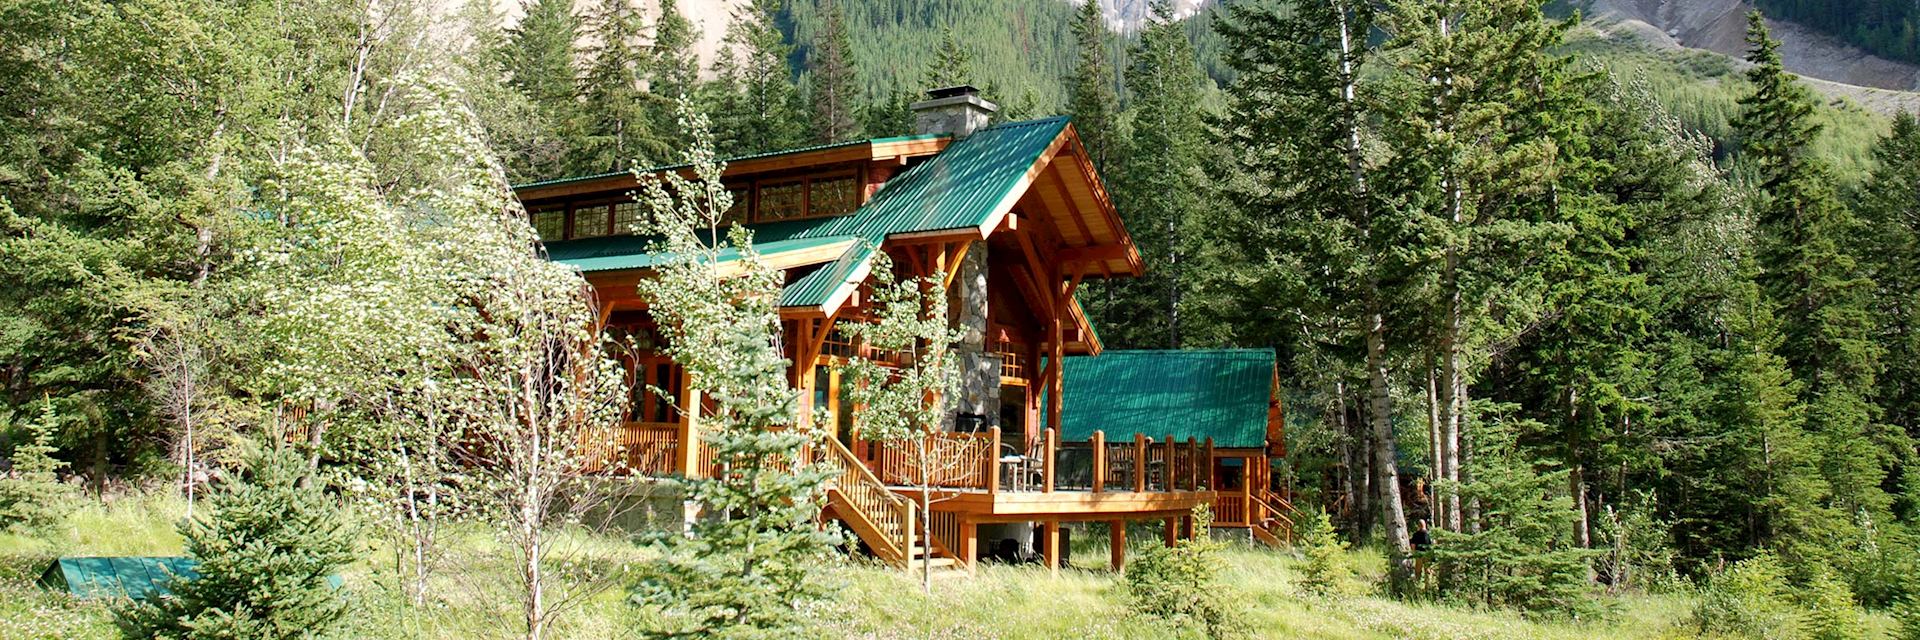 Cathedral Mountain Lodge, Field